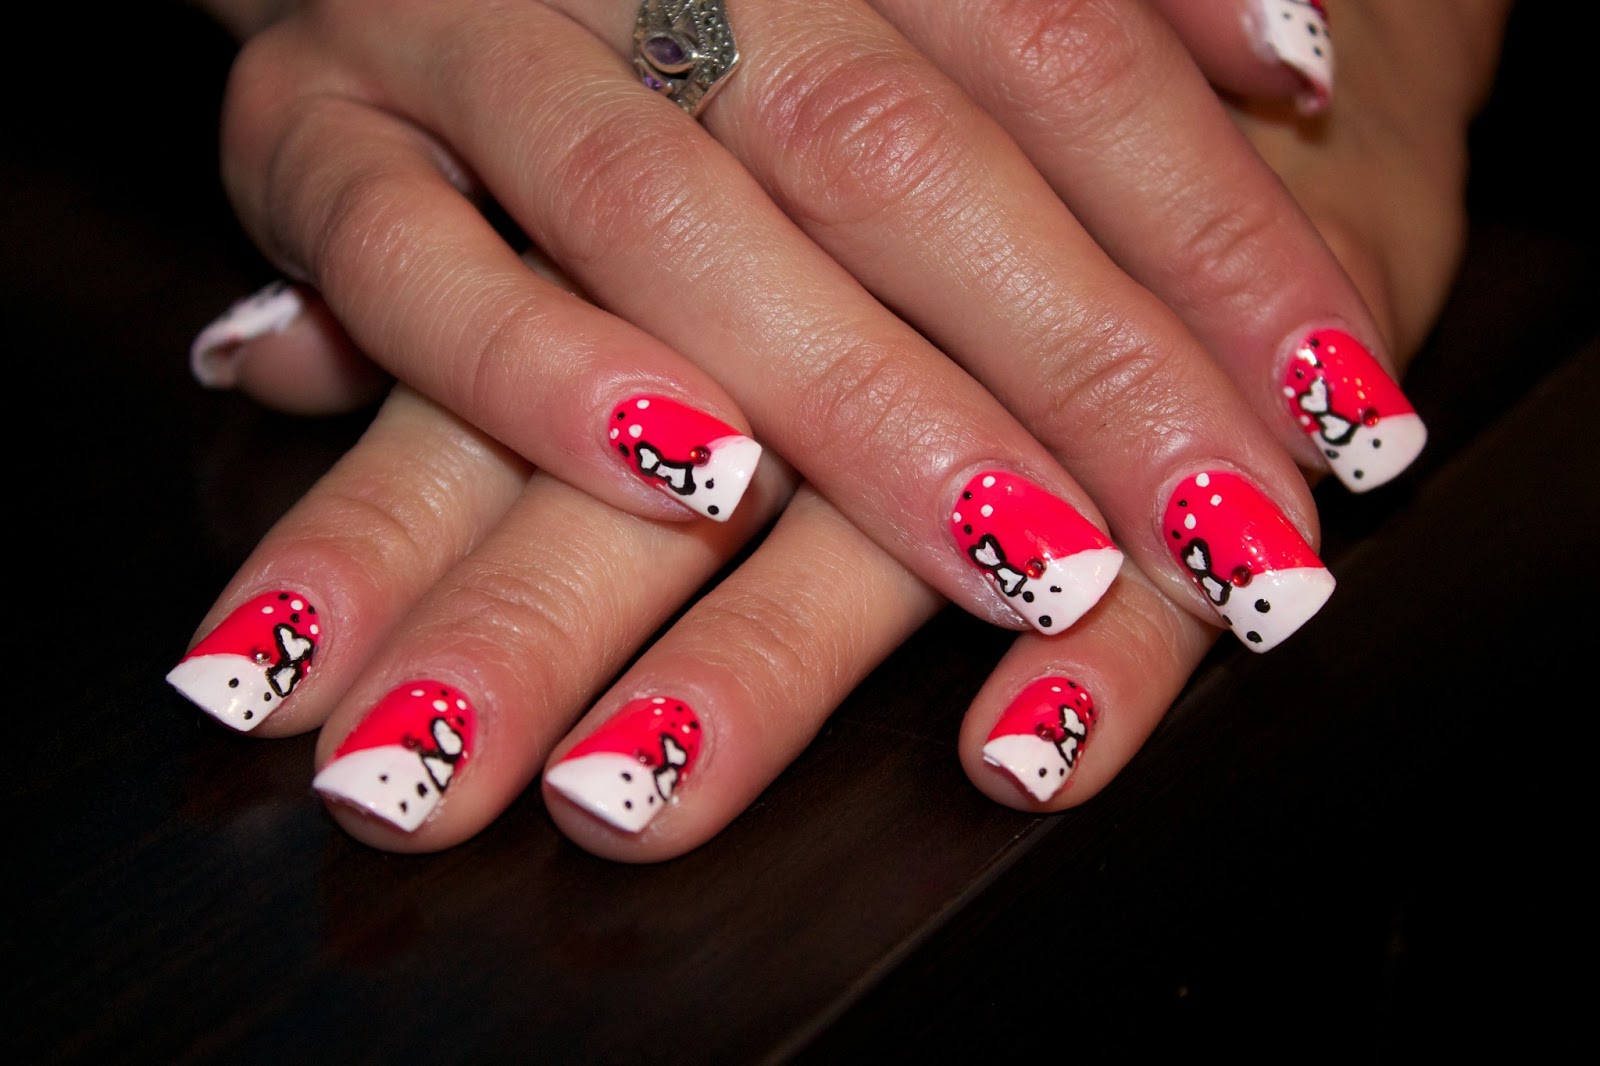 Top 10 Best Valentine'S Day Nails in 2022